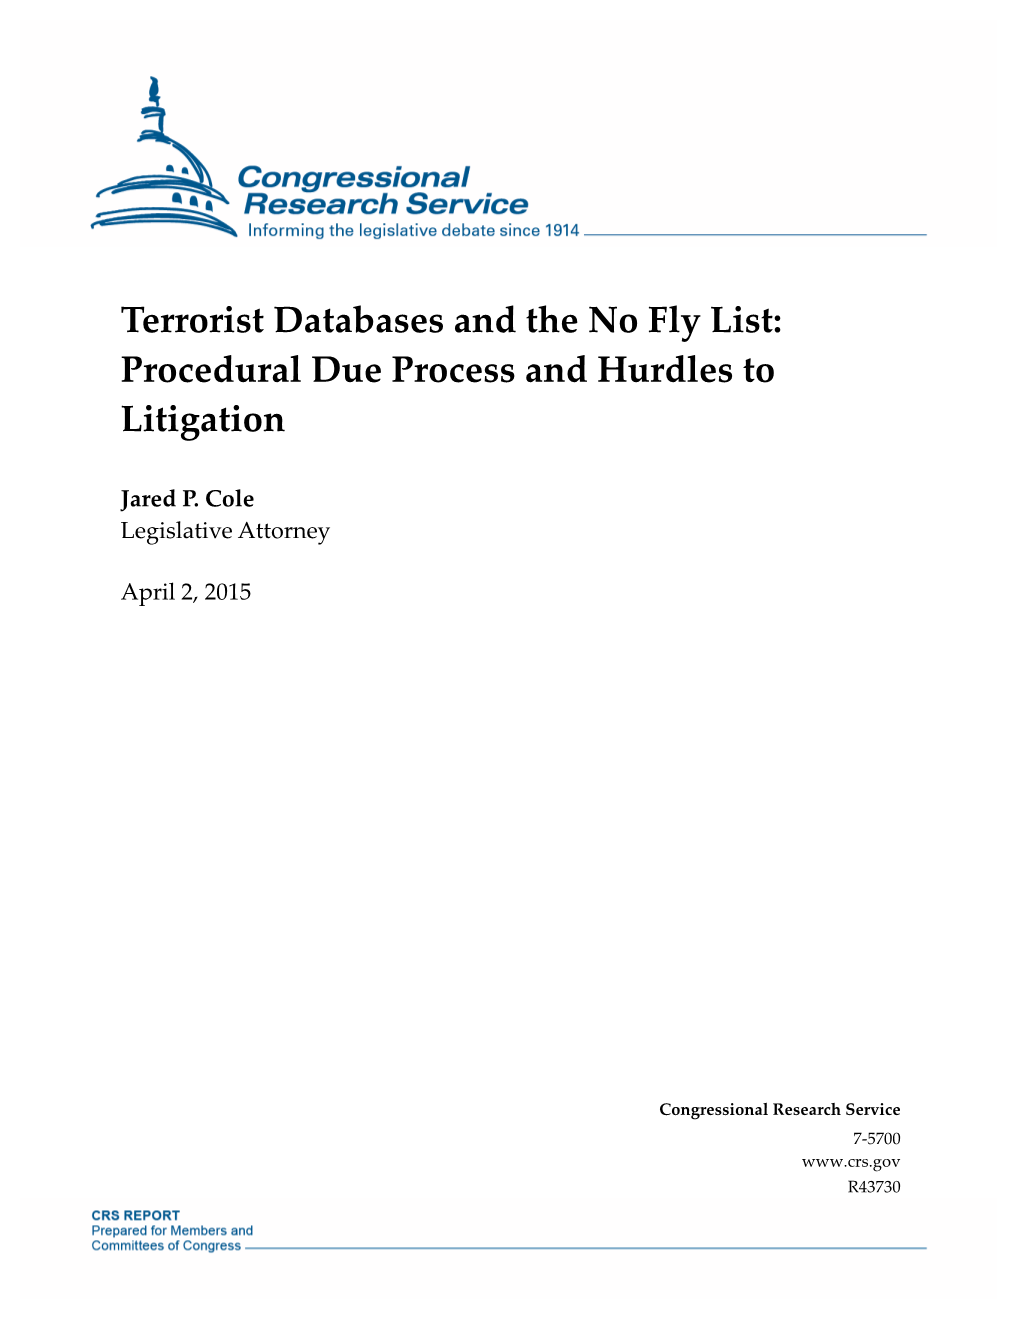 The No Fly List: Procedural Due Process and Hurdles to Litigation